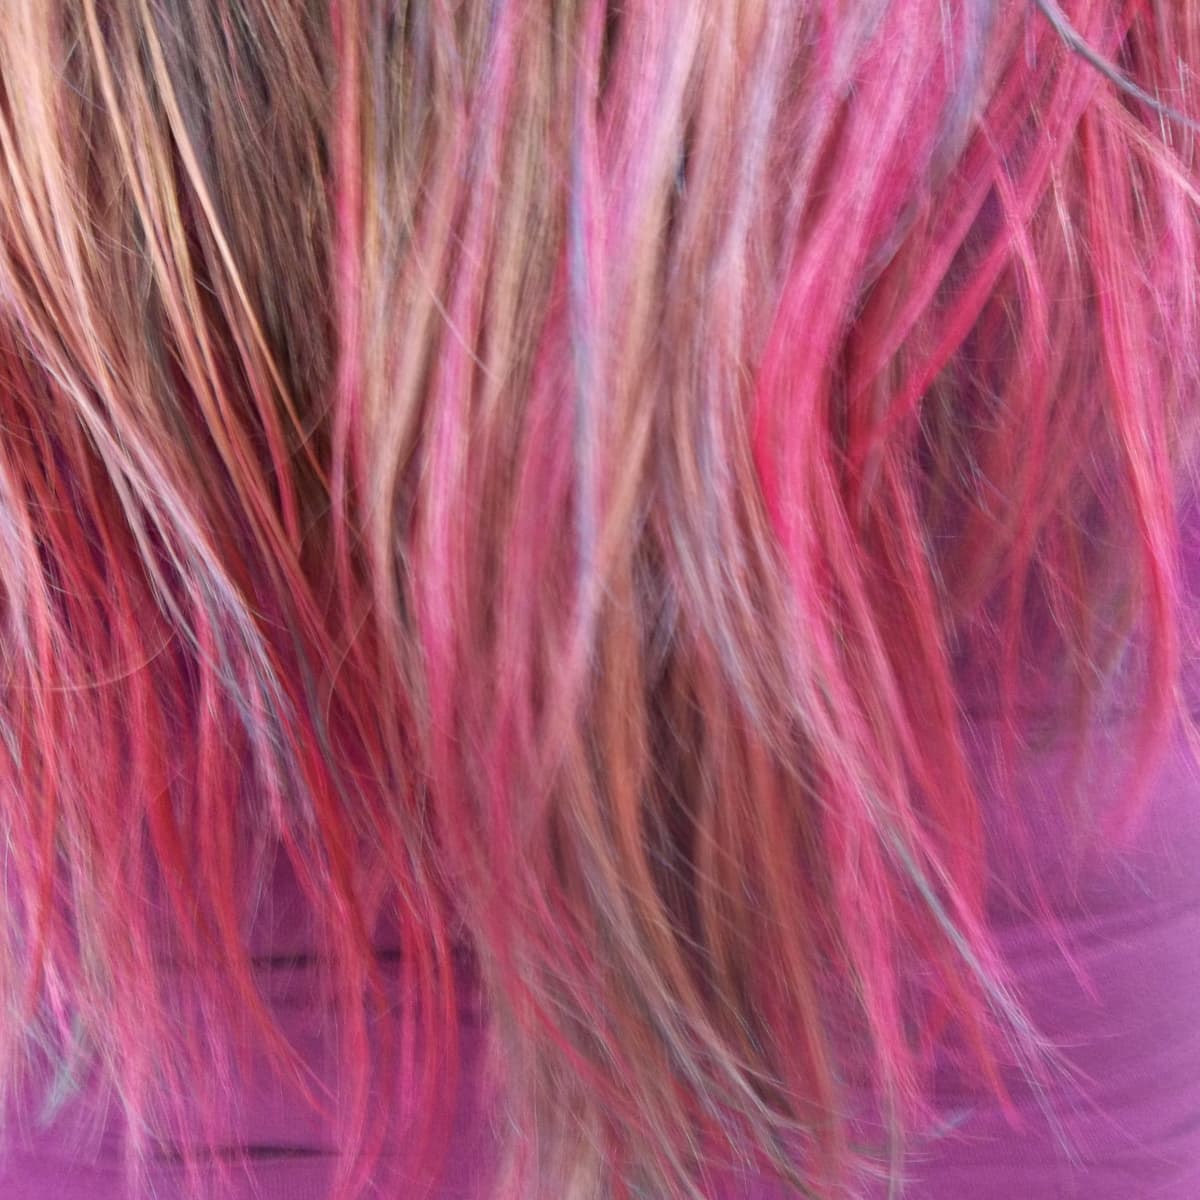 How to Dye the Ends of Your Hair Fun Colors: Tips From a Pro - Bellatory